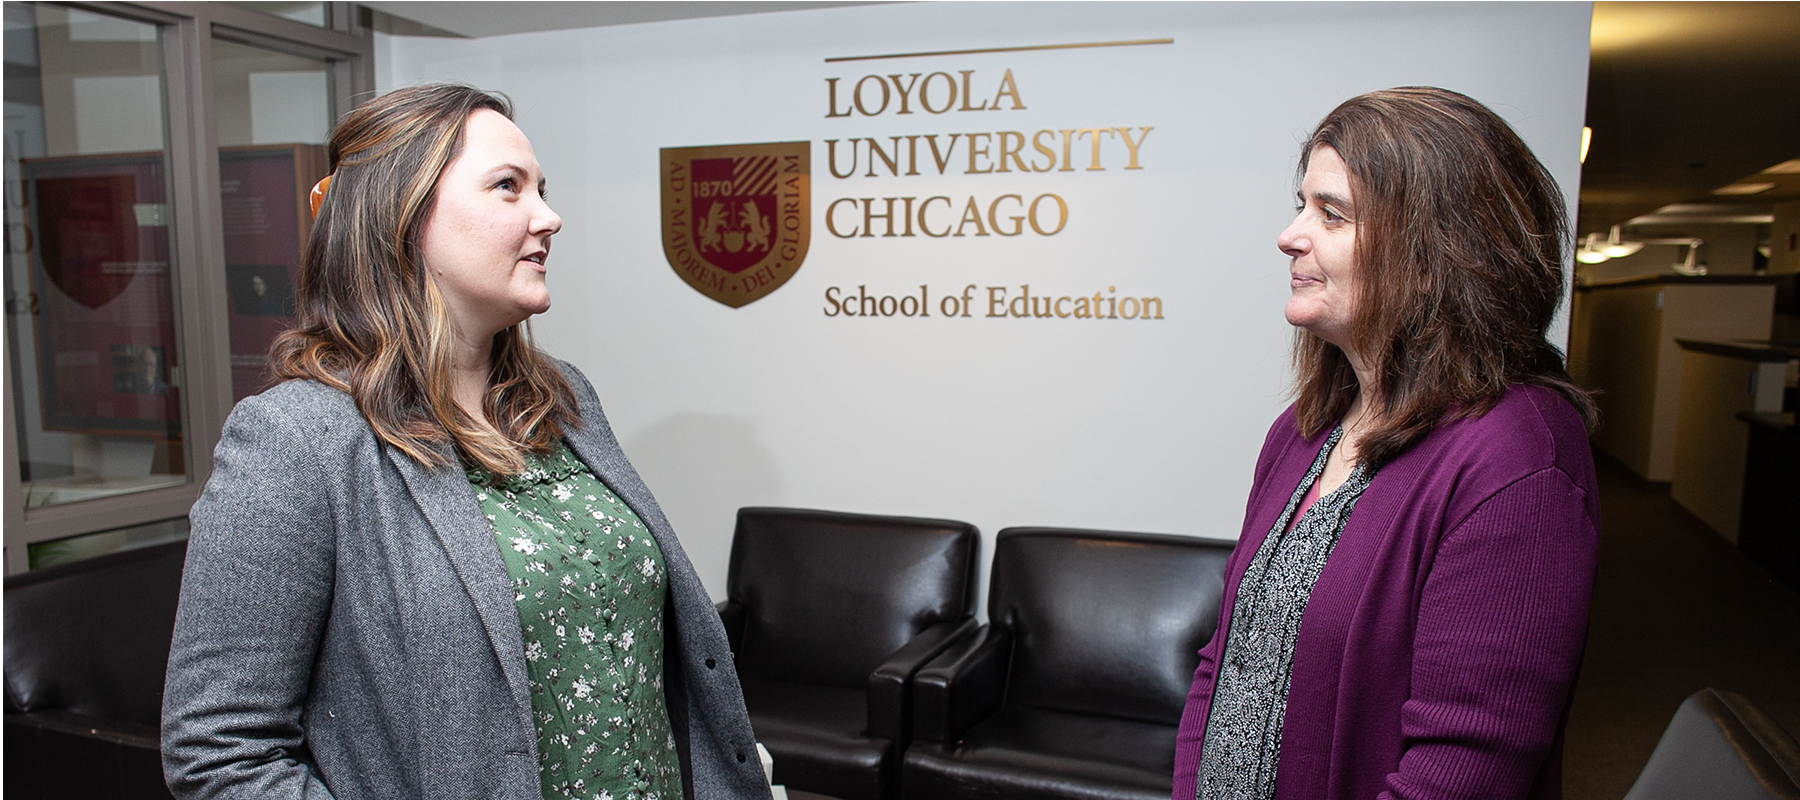 Drs Fenning and Mayworm stand in front of Loyola Chicago logo talking.